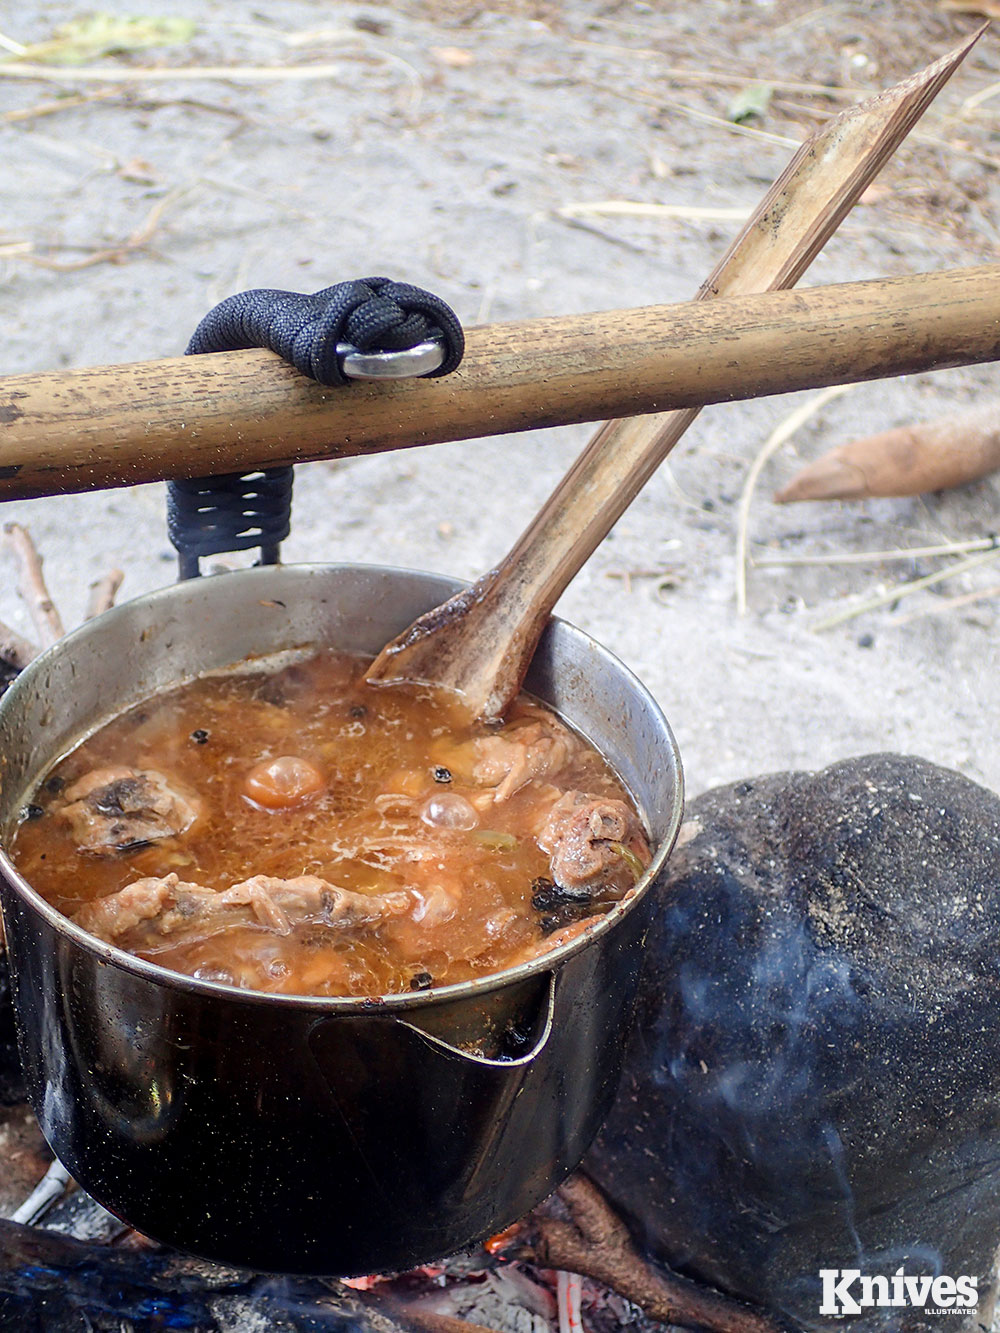 The unique, curved handle of the Uberleben Kessel Bush Pot can be hung over a fire without a pot hanger and without needing to remove the support stick, as would be the case with a bale. This gives it an edge over conventional cook pots.